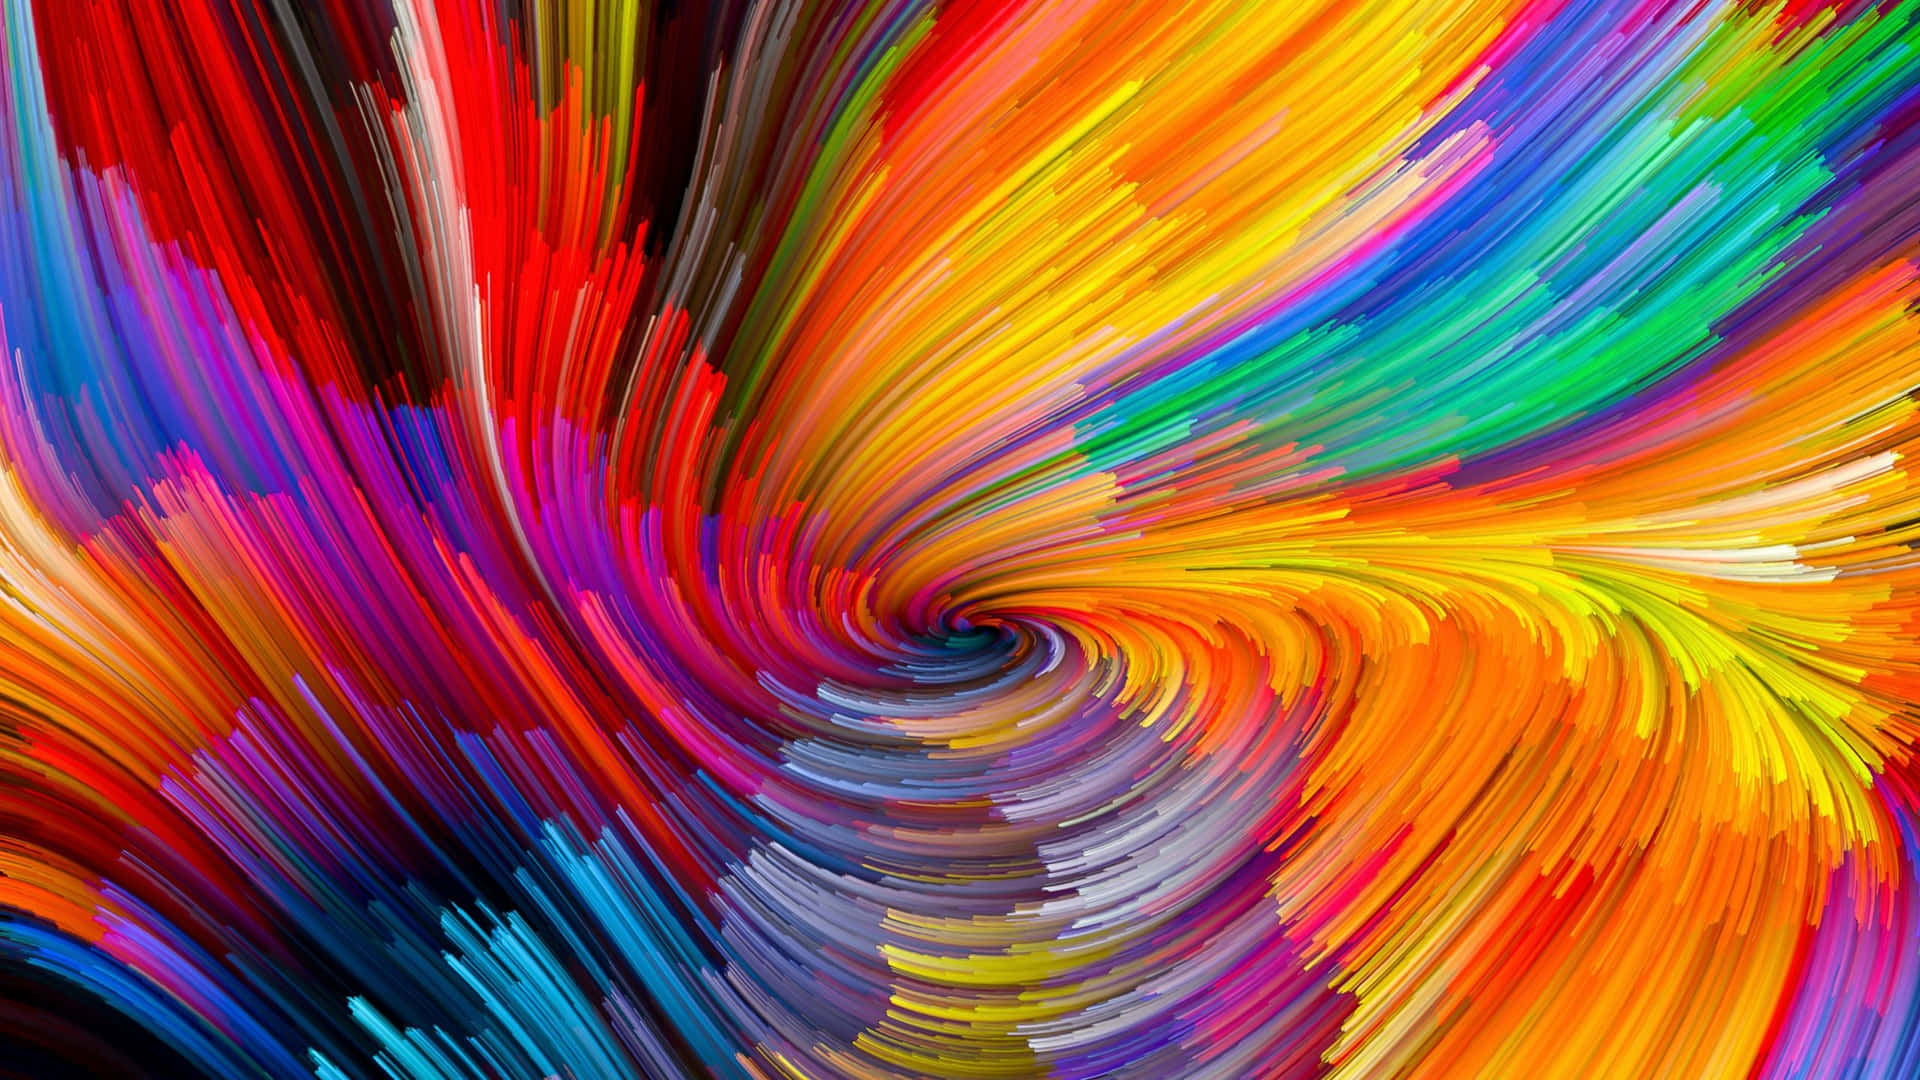 Colorful Swirling Background With A Swirling Pattern Wallpaper